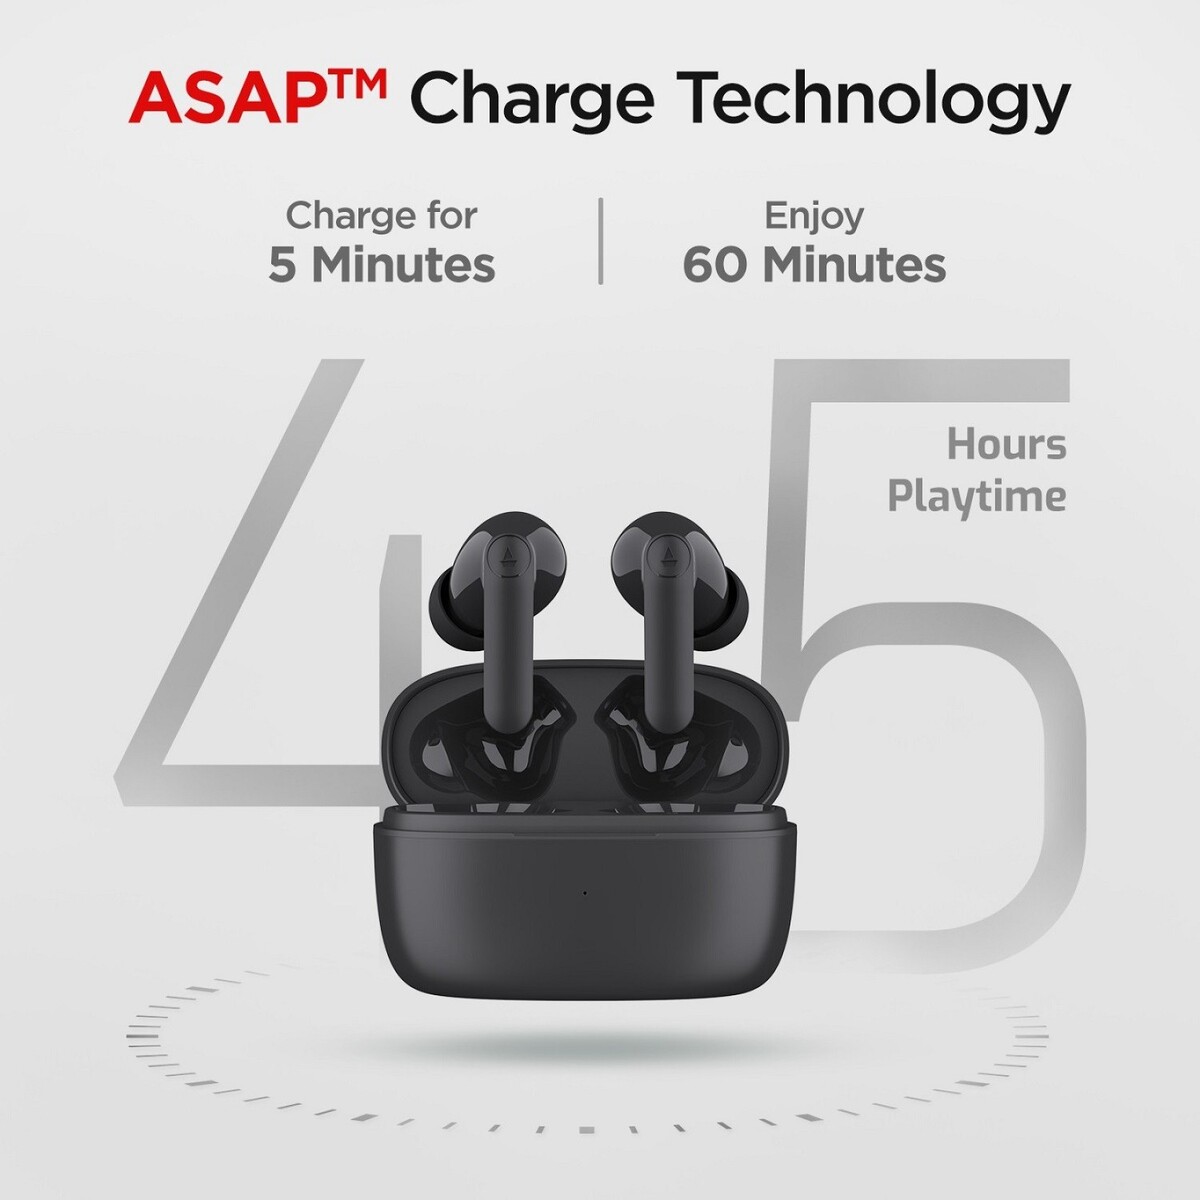 Boat Airdopes 131 PRO Wireless Earbuds with ENx Noise cancellation technology, BEAST mode, 45 hours of battery life, IPX5 Sweat & Water Resistance